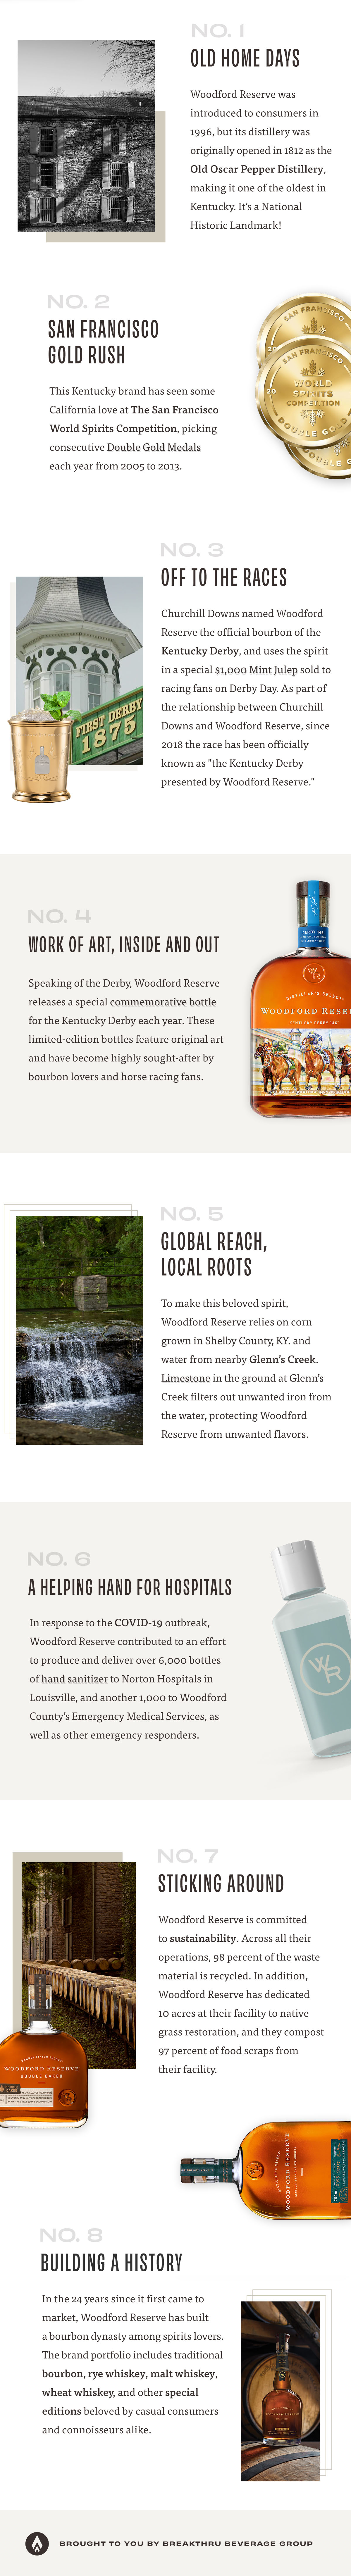 SYTYK Woodford Reserve Infographic